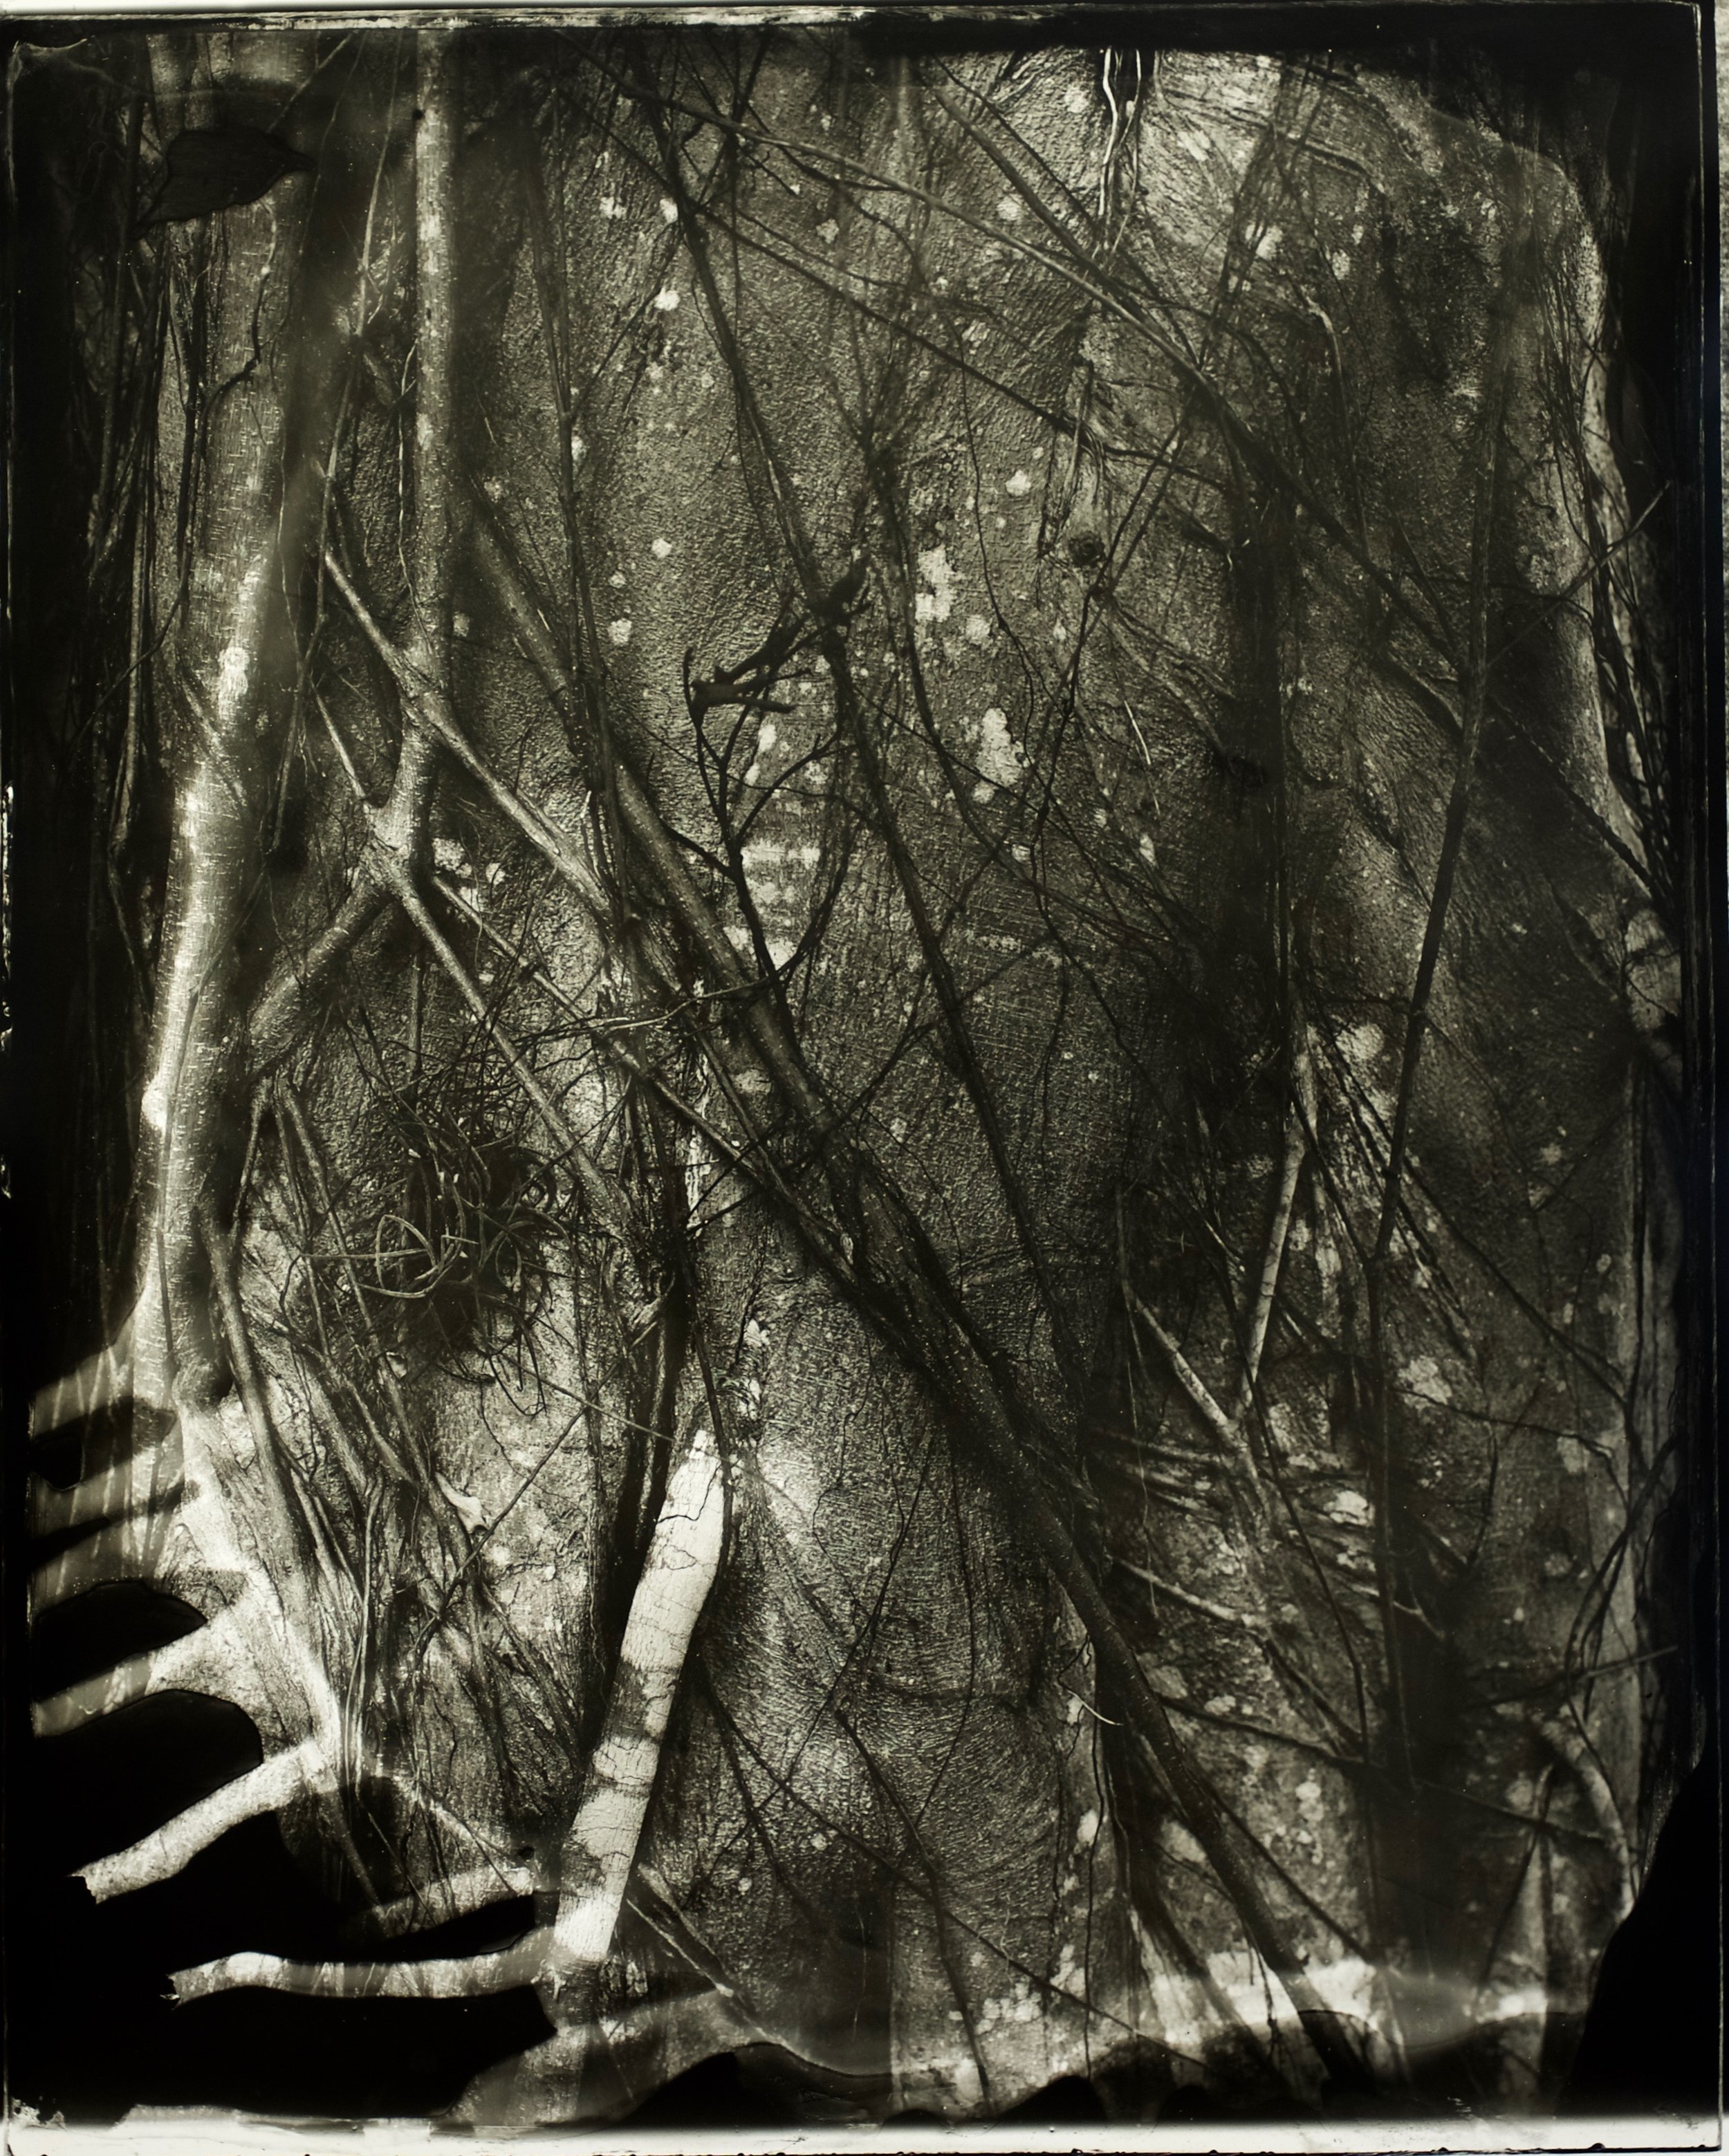 Implicāre, 30 in. x 37 in., collodian negative hand printed on Fomatone paper, 2018. #2018-7.(Slighly lower contrast than #6.).jpg